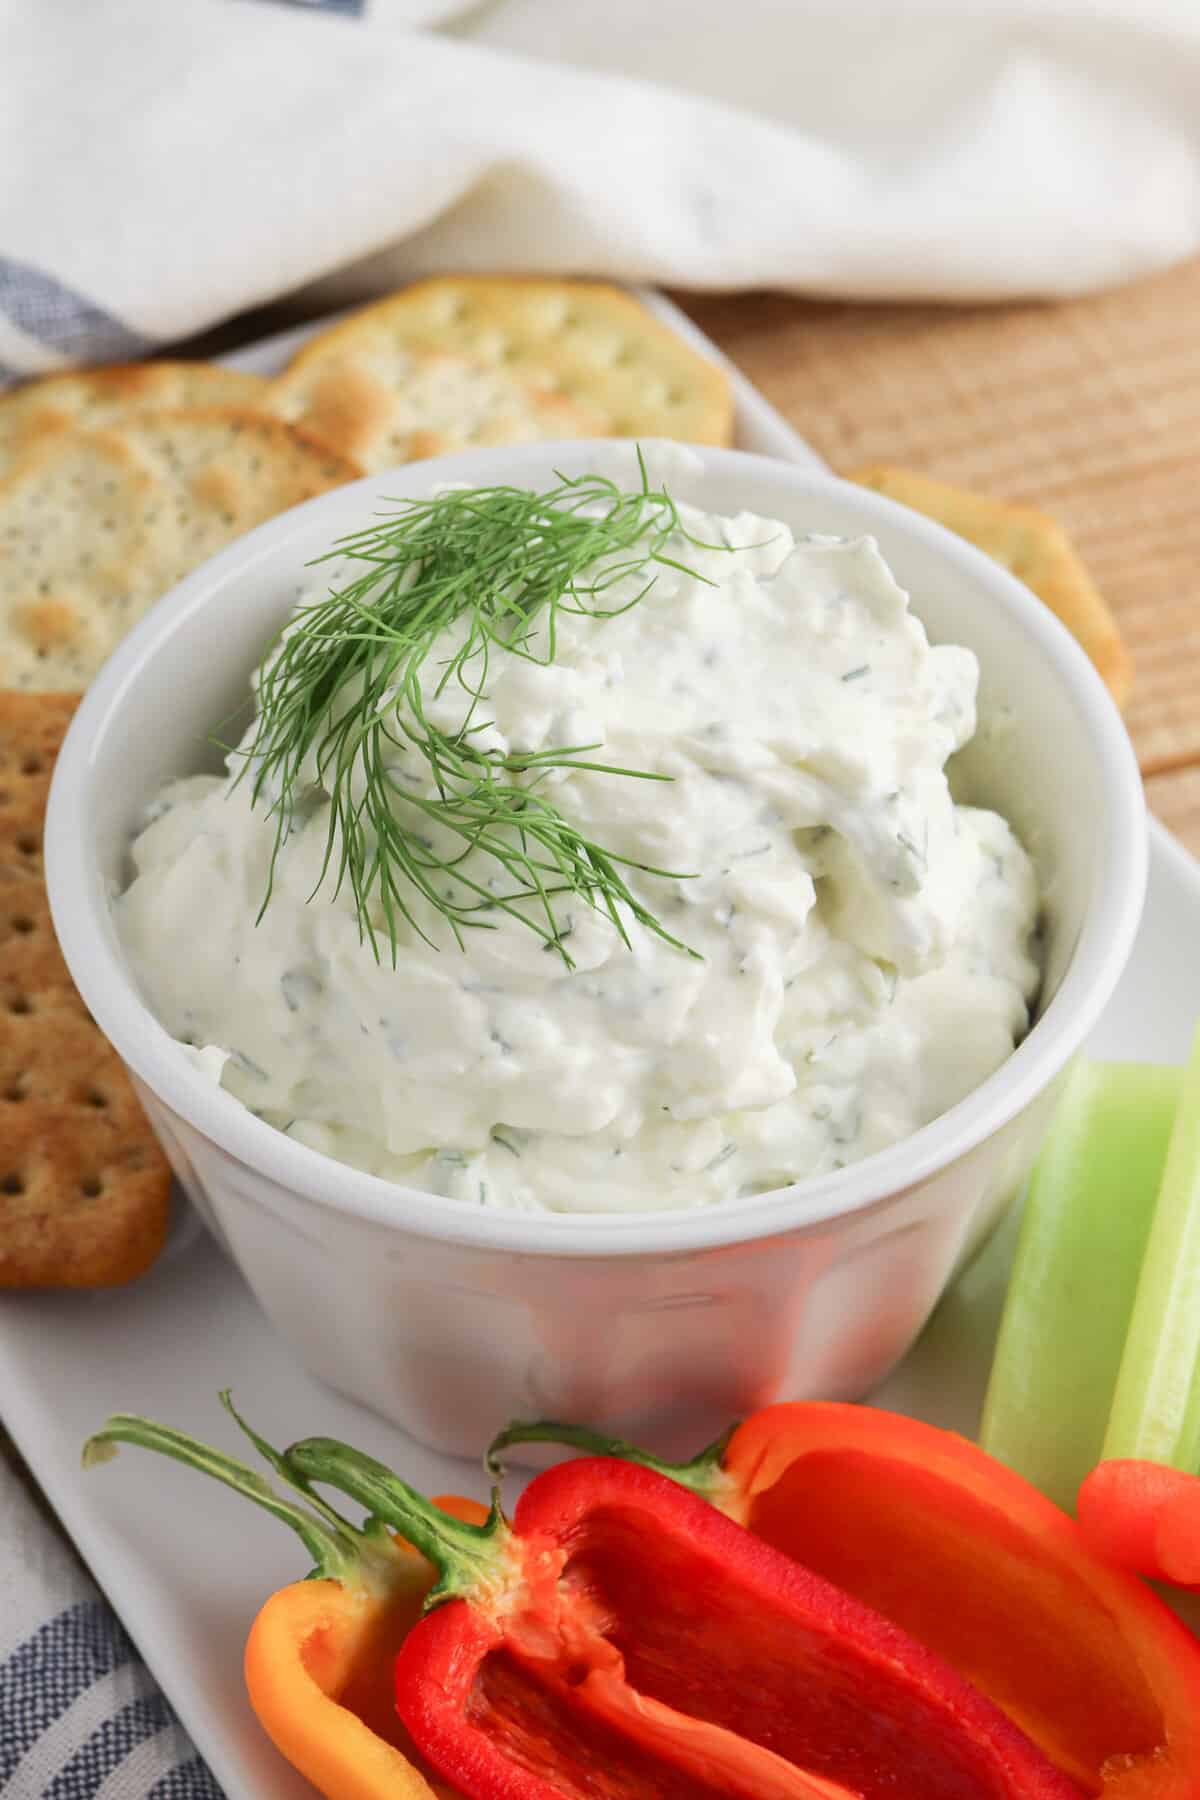 Cream cheese dill dip garnished with fresh dill sprig and served with crackers and fresh peppers and celery for dipping.